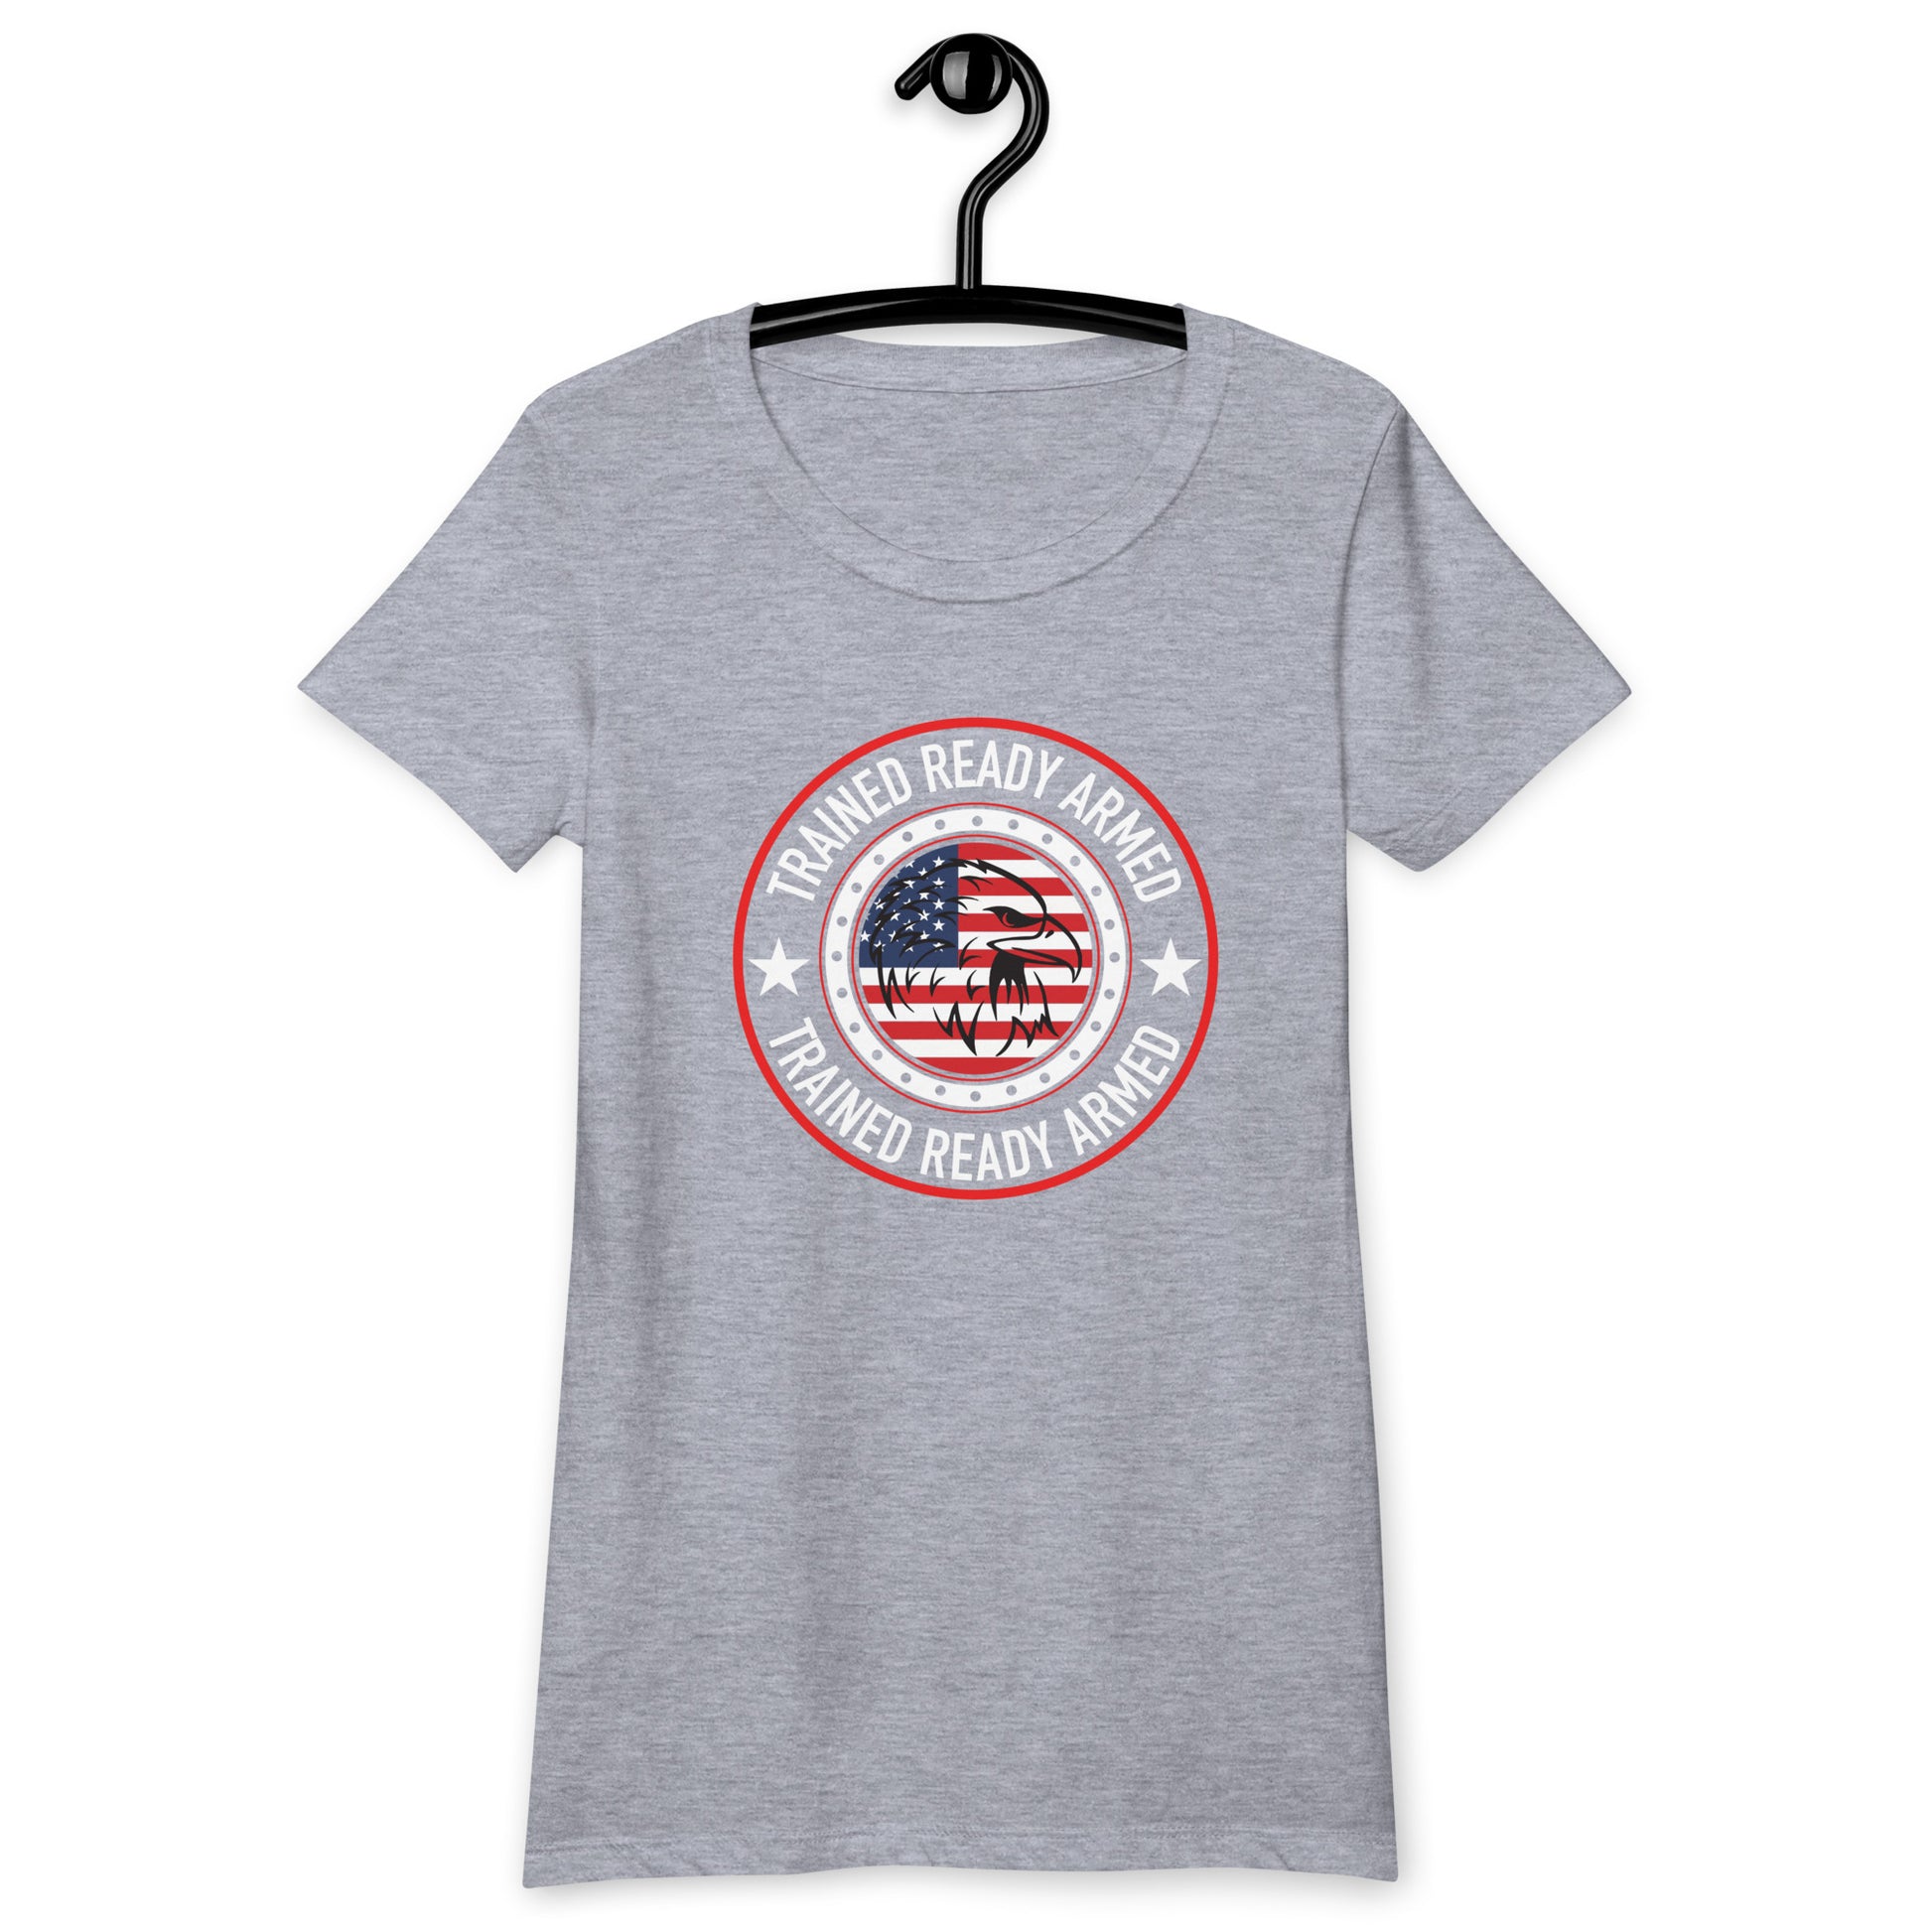 TRA USA 360.1 Women’s fitted t-shirt - Trained Ready Armed Apparel